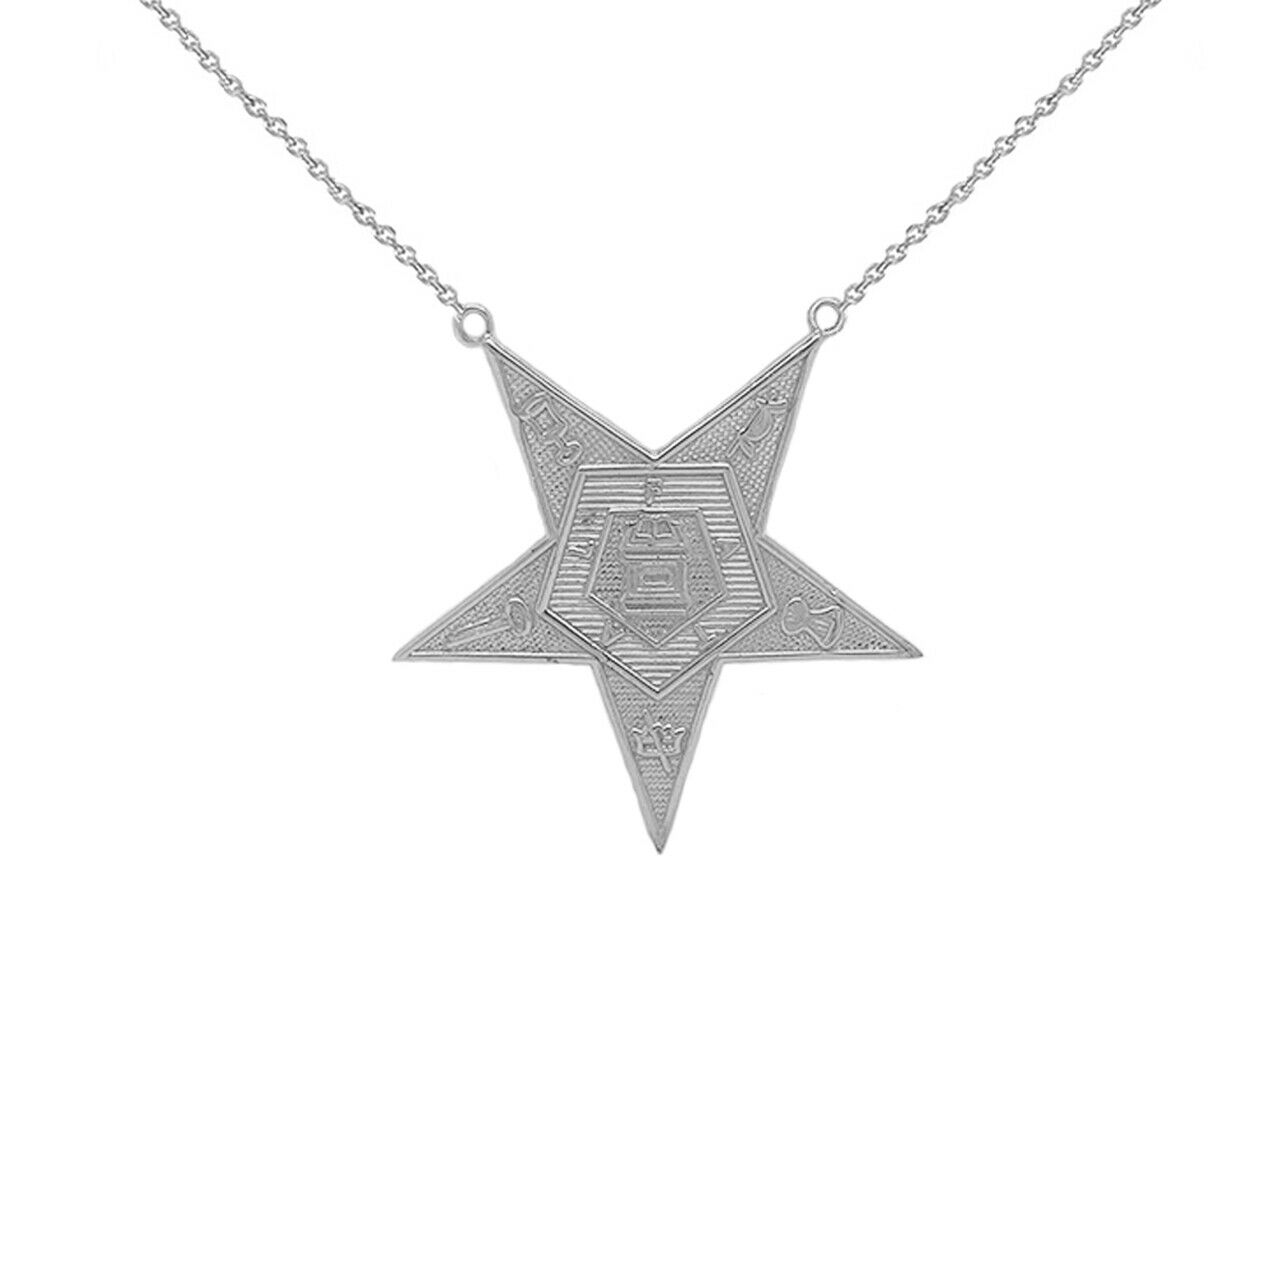 925 Sterling Silver Order of the Eastern Star (OES) Masonic Pendant Necklace